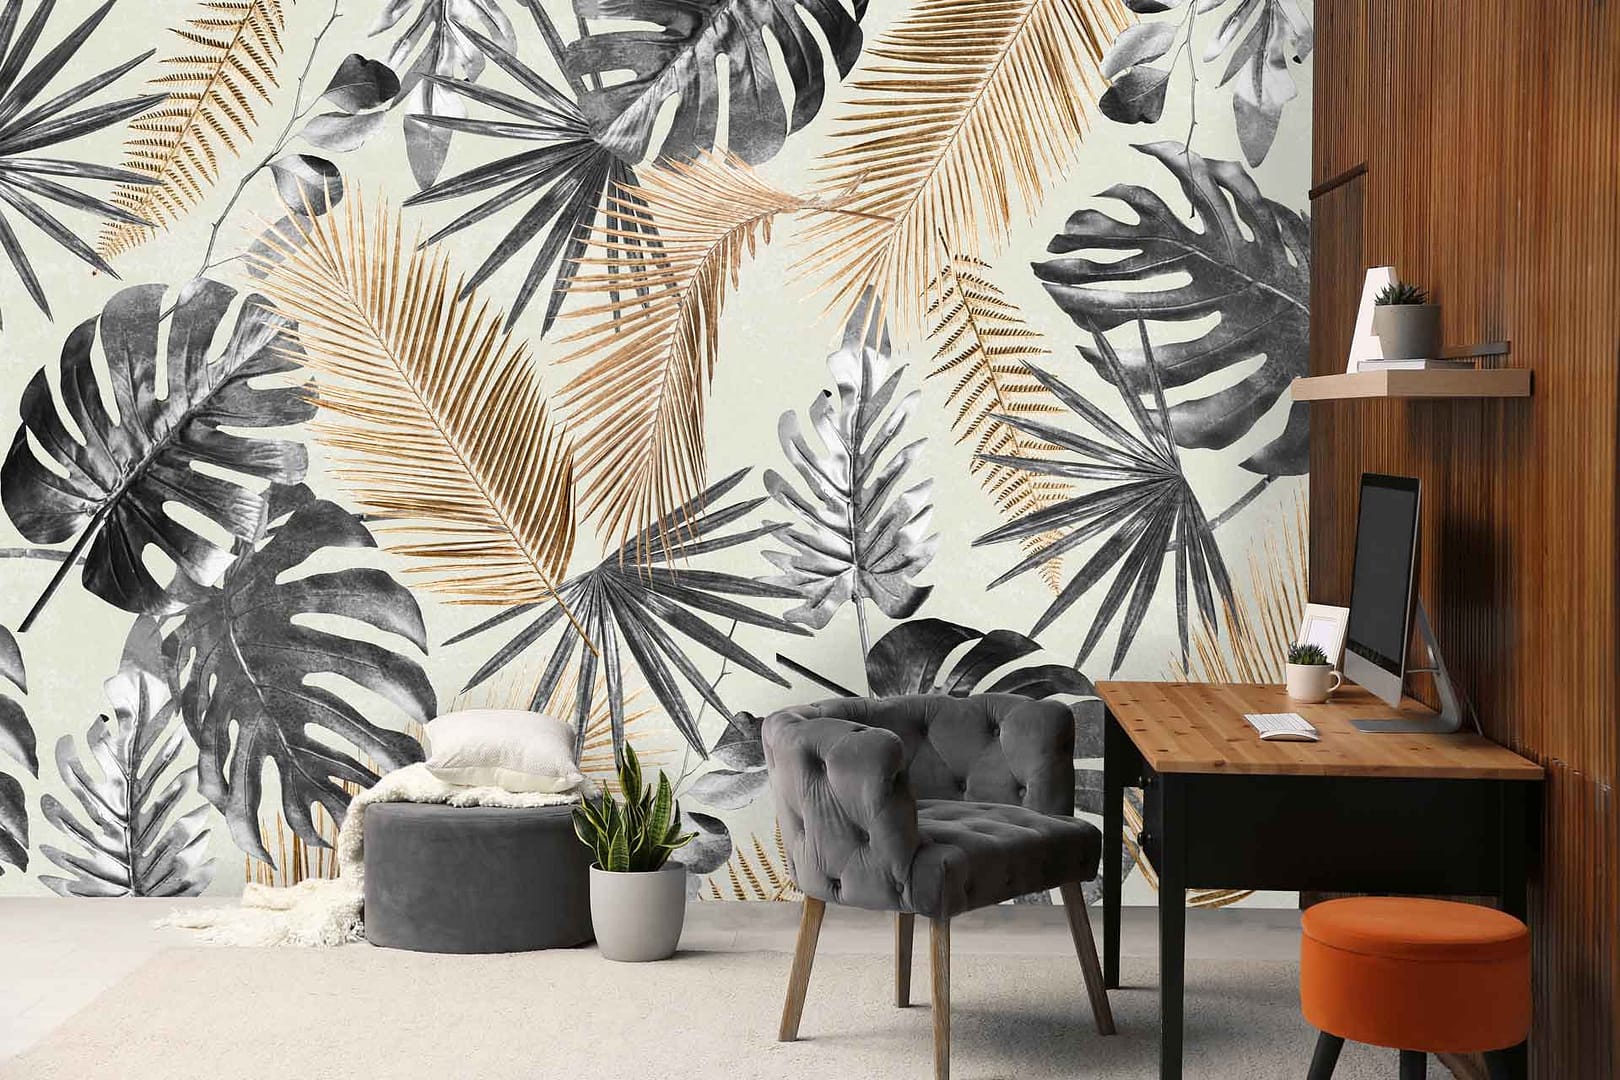 Gold Tropic - a wallpaper made up of gold and black tropical leaves with a grunge overlay by Cara Saven Wall Design